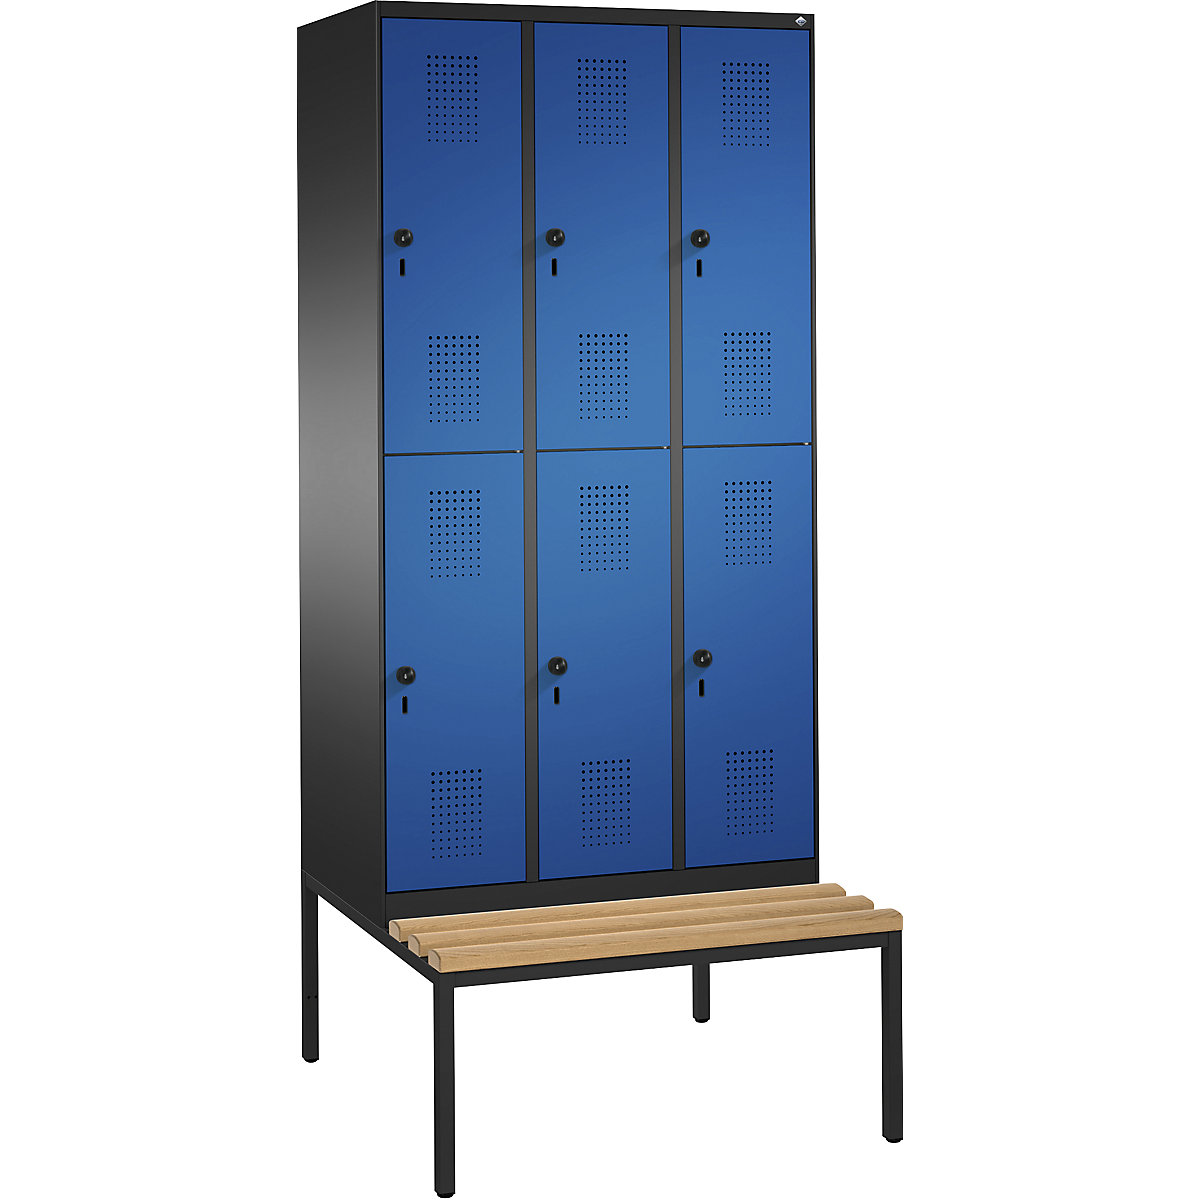 EVOLO cloakroom locker, double tier, with bench – C+P, 3 compartments, 2 shelf compartments each, compartment width 300 mm, black grey / gentian blue-10